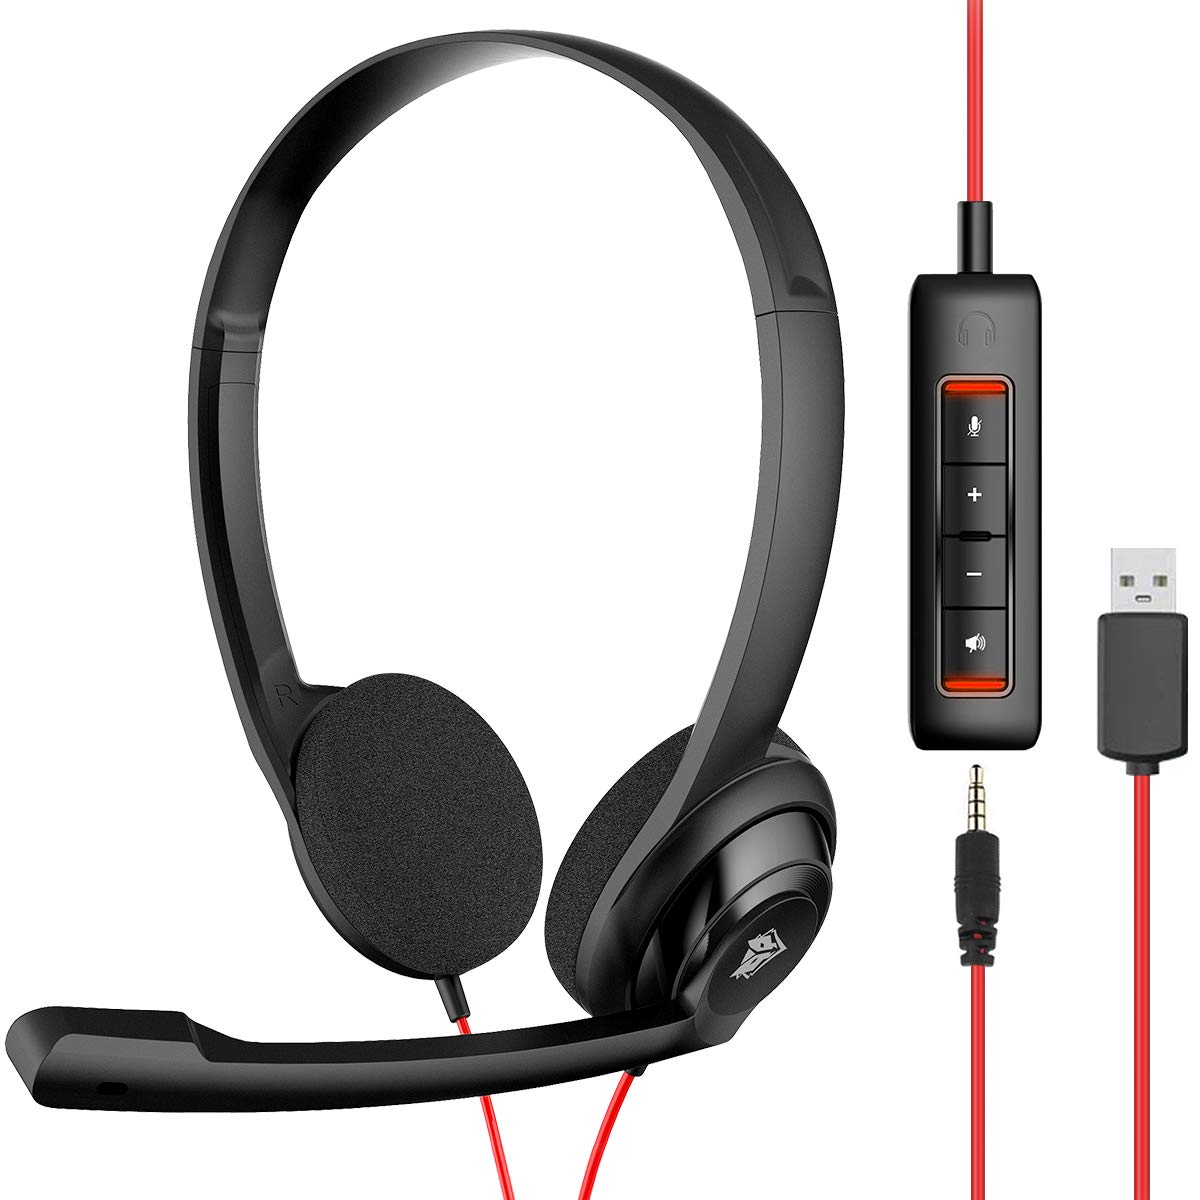 NUBWO PC Headset USB with Noise Cancelling Mic, 3.5mm/USB Computer Headset with Detachable surround sound Vol./Mute USB Control, On-Ear Wire Voip Headsets for casual gaming, e-learning and music